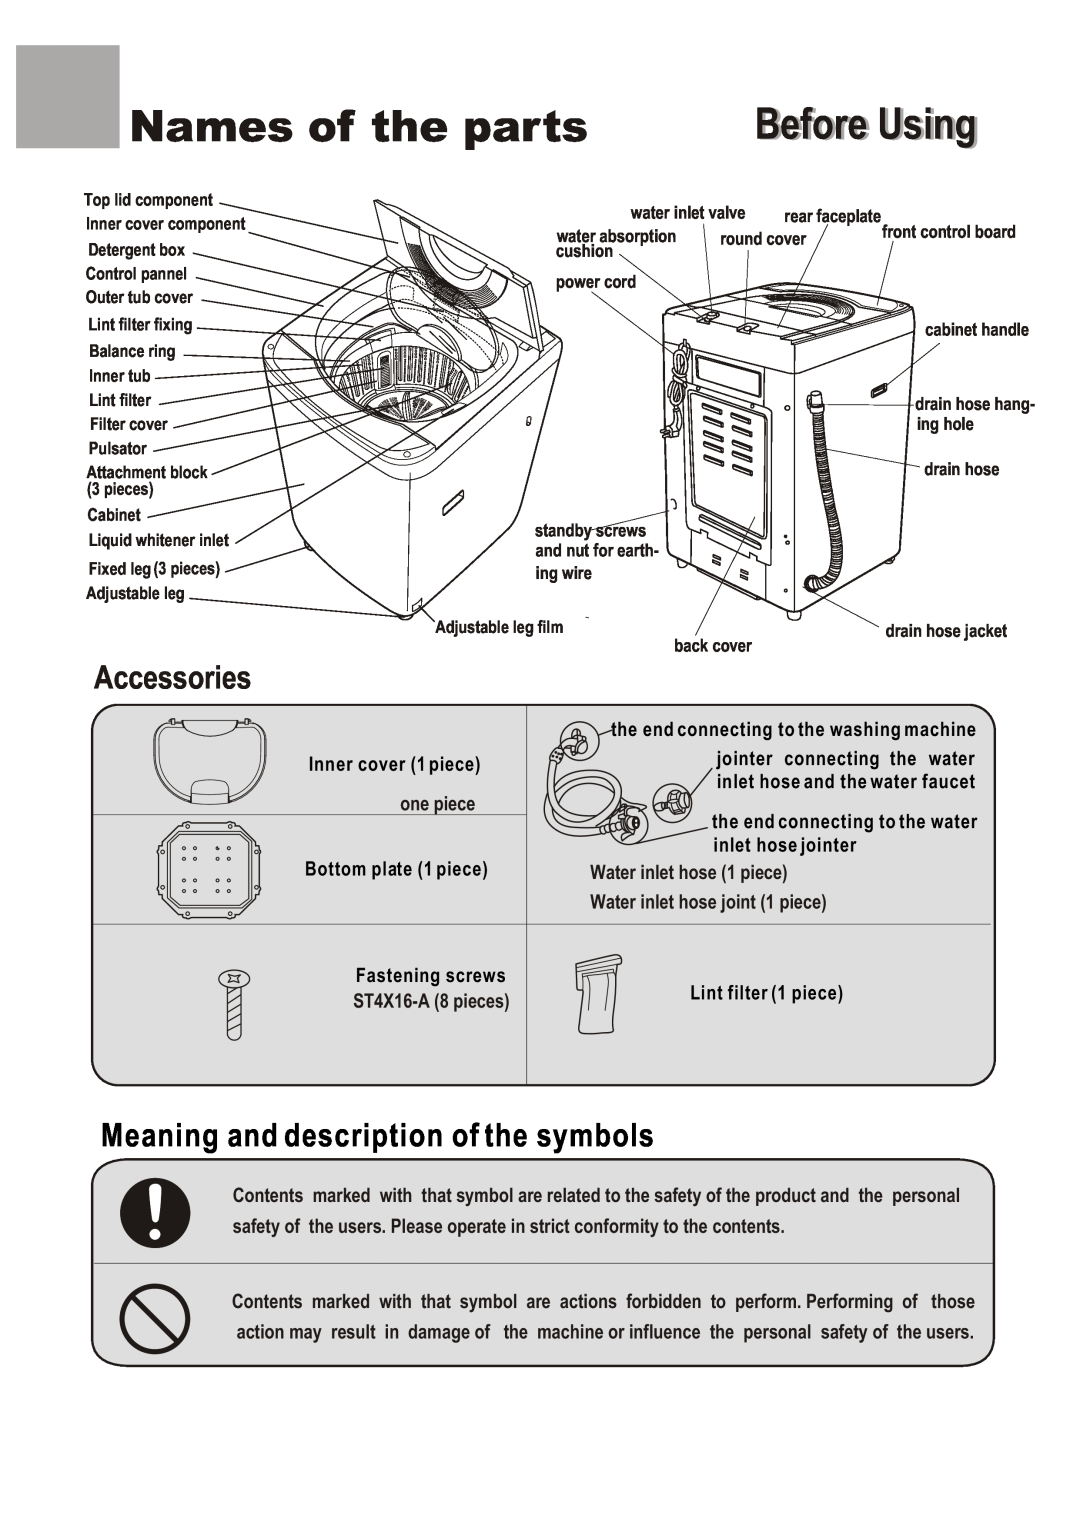 Haier WM6002A user manual Names of the parts, Before Using, Accessories, Meaning and description of the symbols 